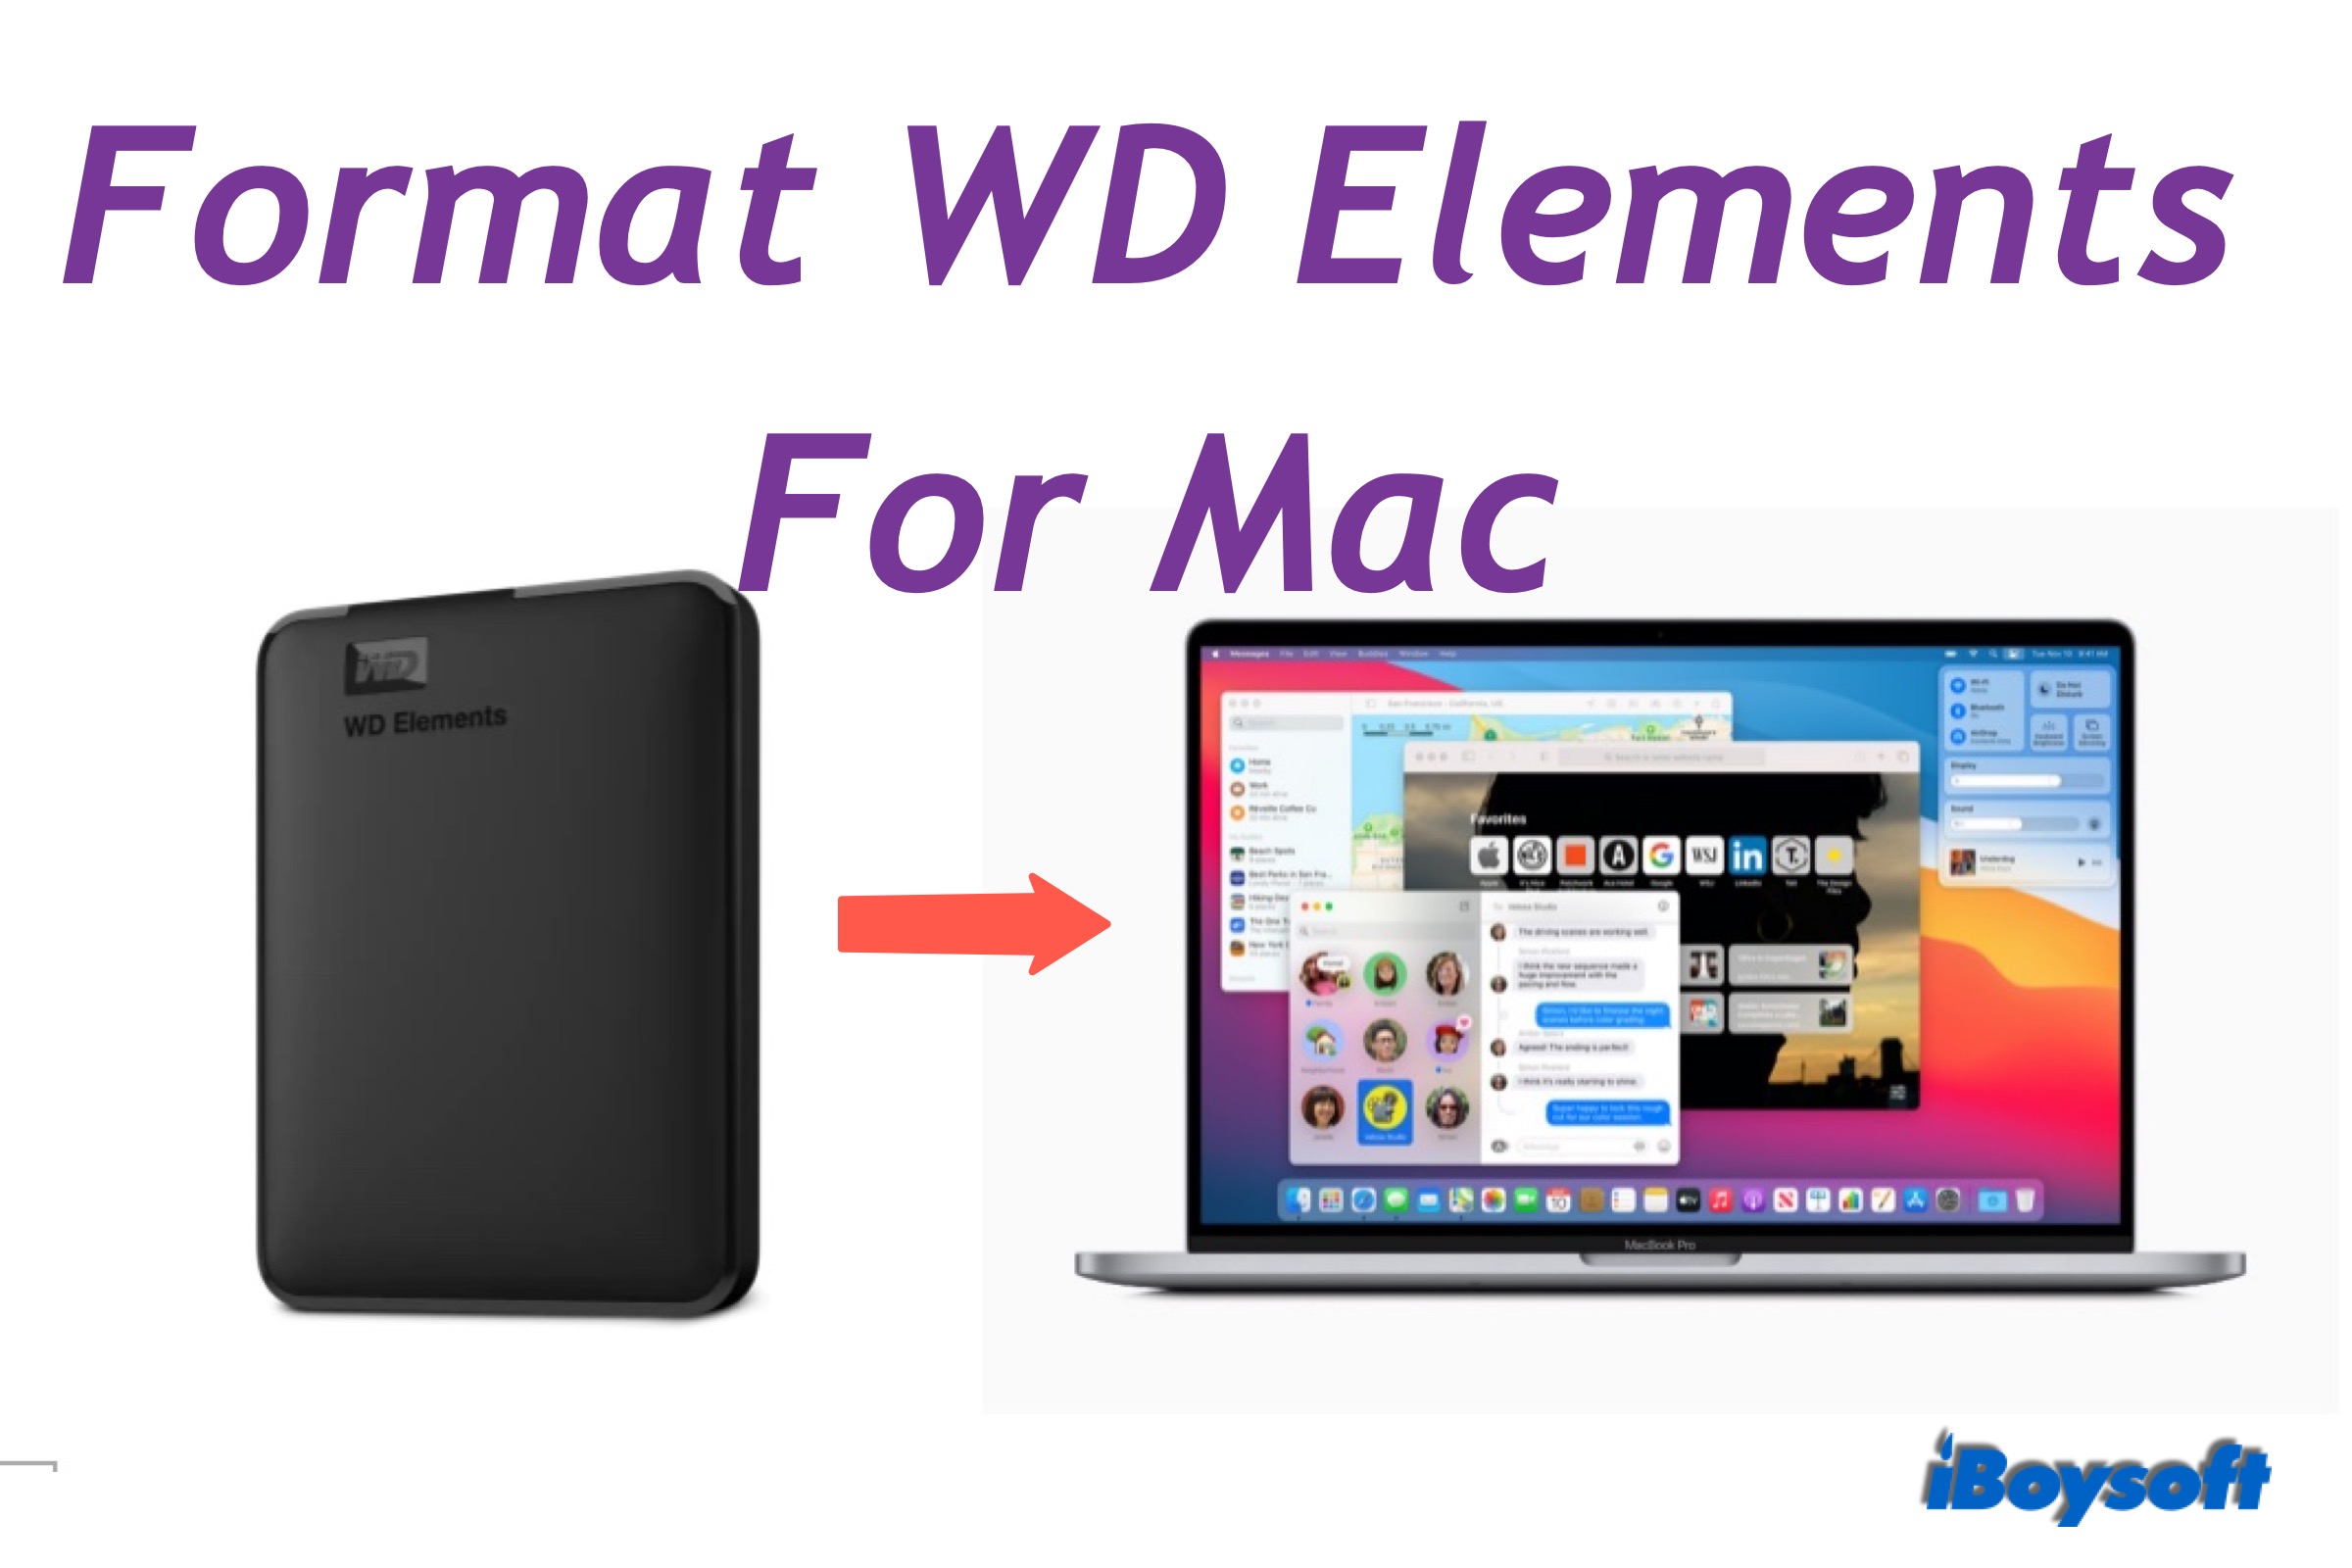 format WD Elements for Mac